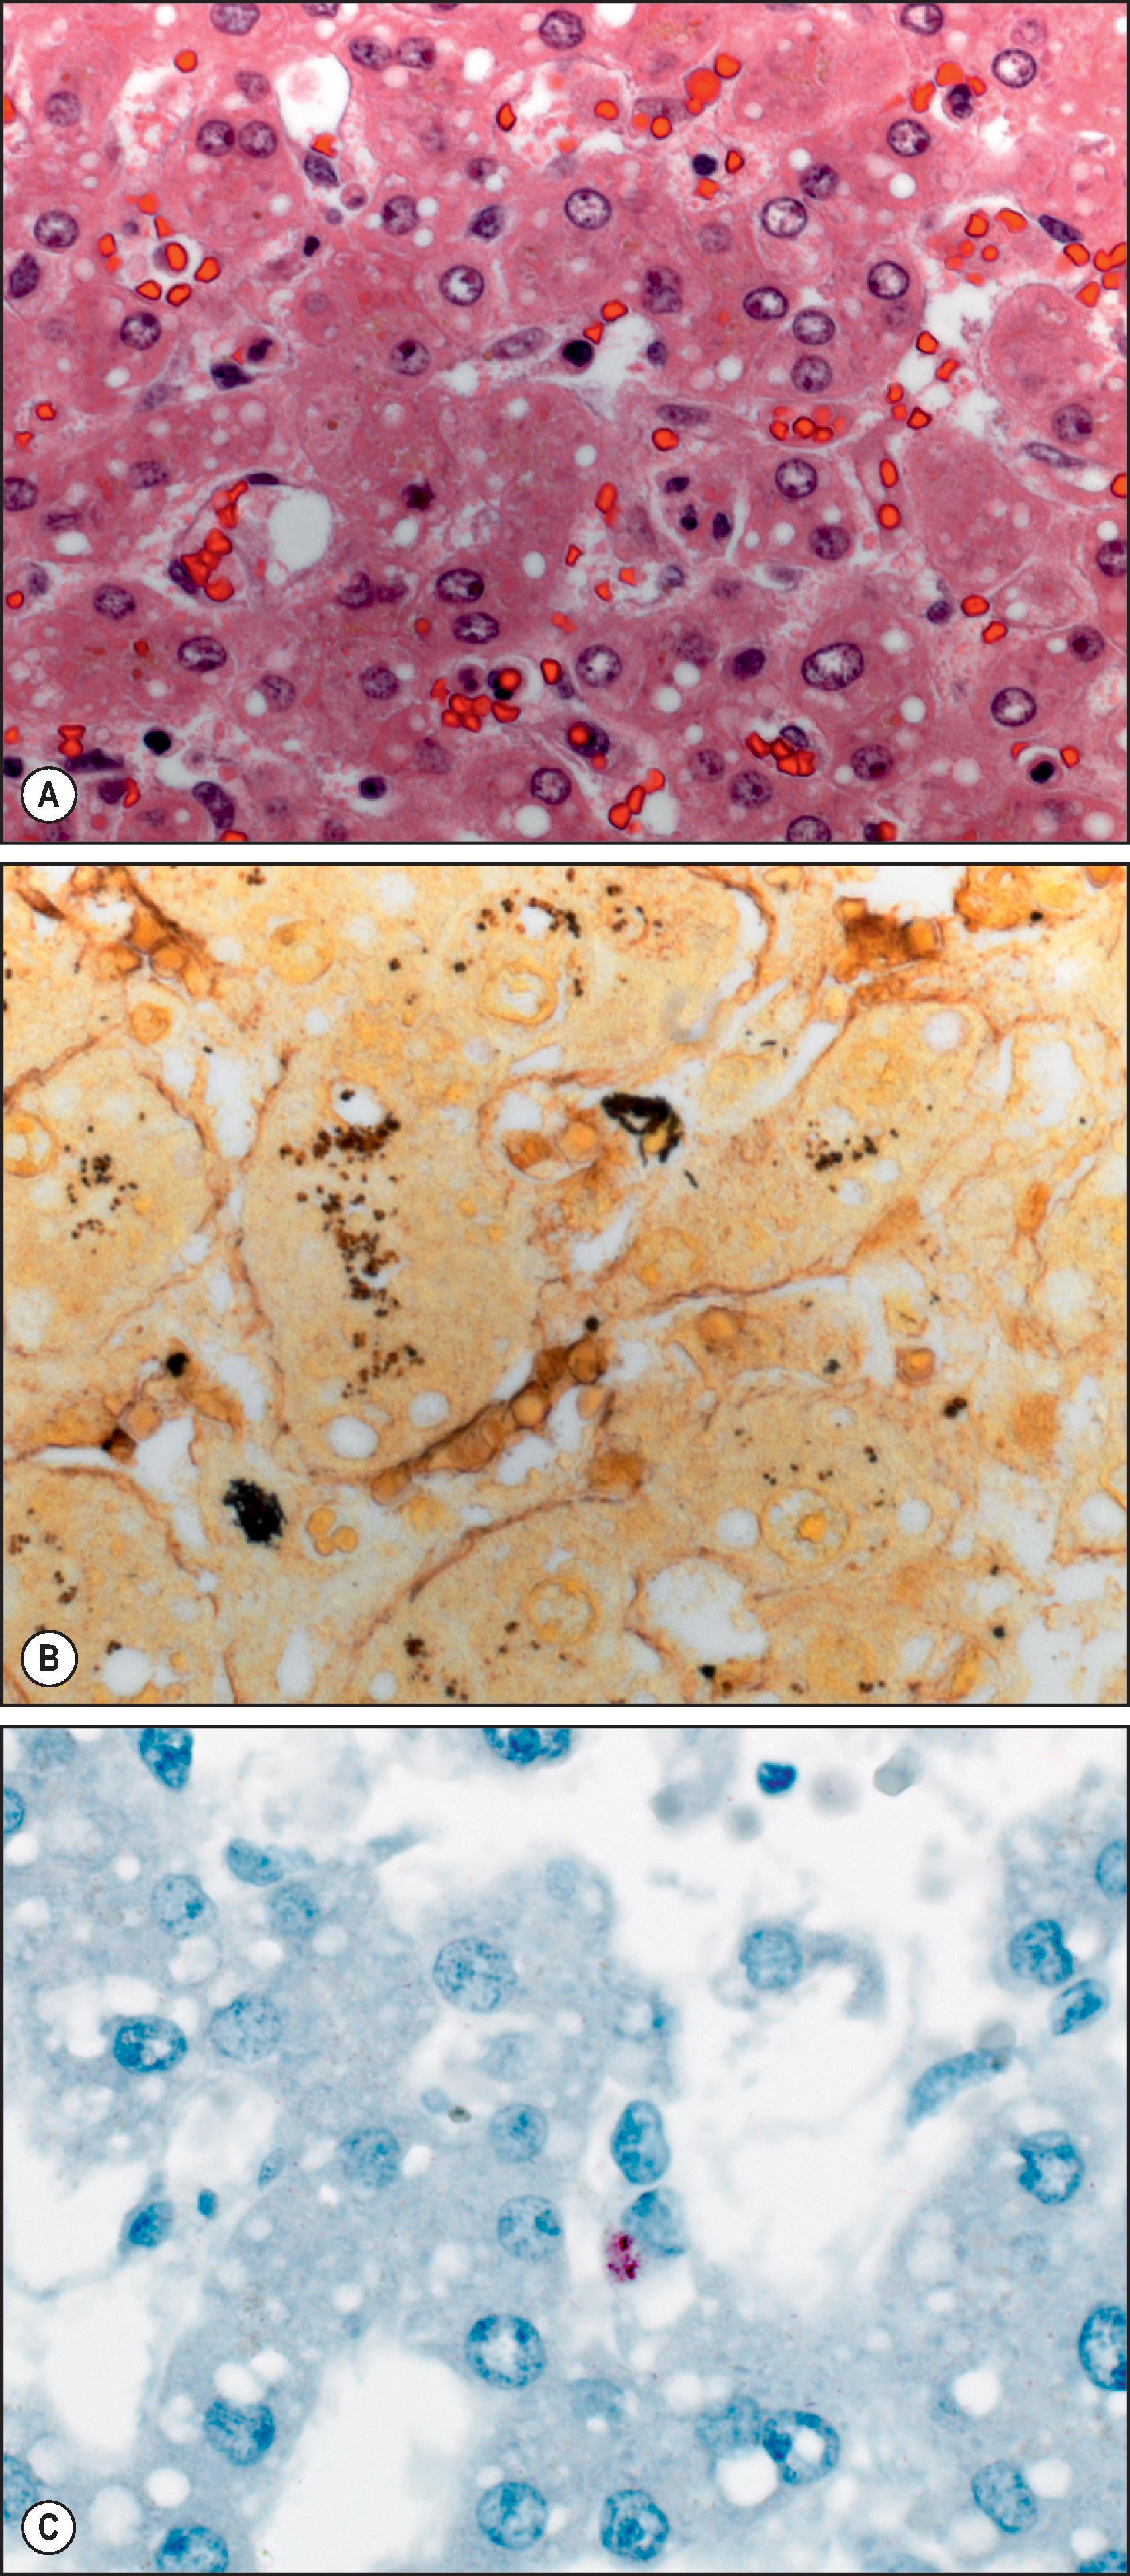 Figure 7.27, Streptobacillus moniliformis (rat-bite fever). (A) Fatal case of rat-bite fever in a patient who was exposed to infected rodents. Liver shows small-droplet fatty change and erythrophagocytosis within hepatic sinusoids. (H&E stain.) (B) Silver stain (Steiner) shows single and aggregated bacilli in hepatic sinusoids. (C) In situ hybridization for S. moniliformis shows intracellular staining of bacterial nucleic acids (immunoalkaline phosphatase staining, naphthol fast red substrate with haematoxylin counterstain).